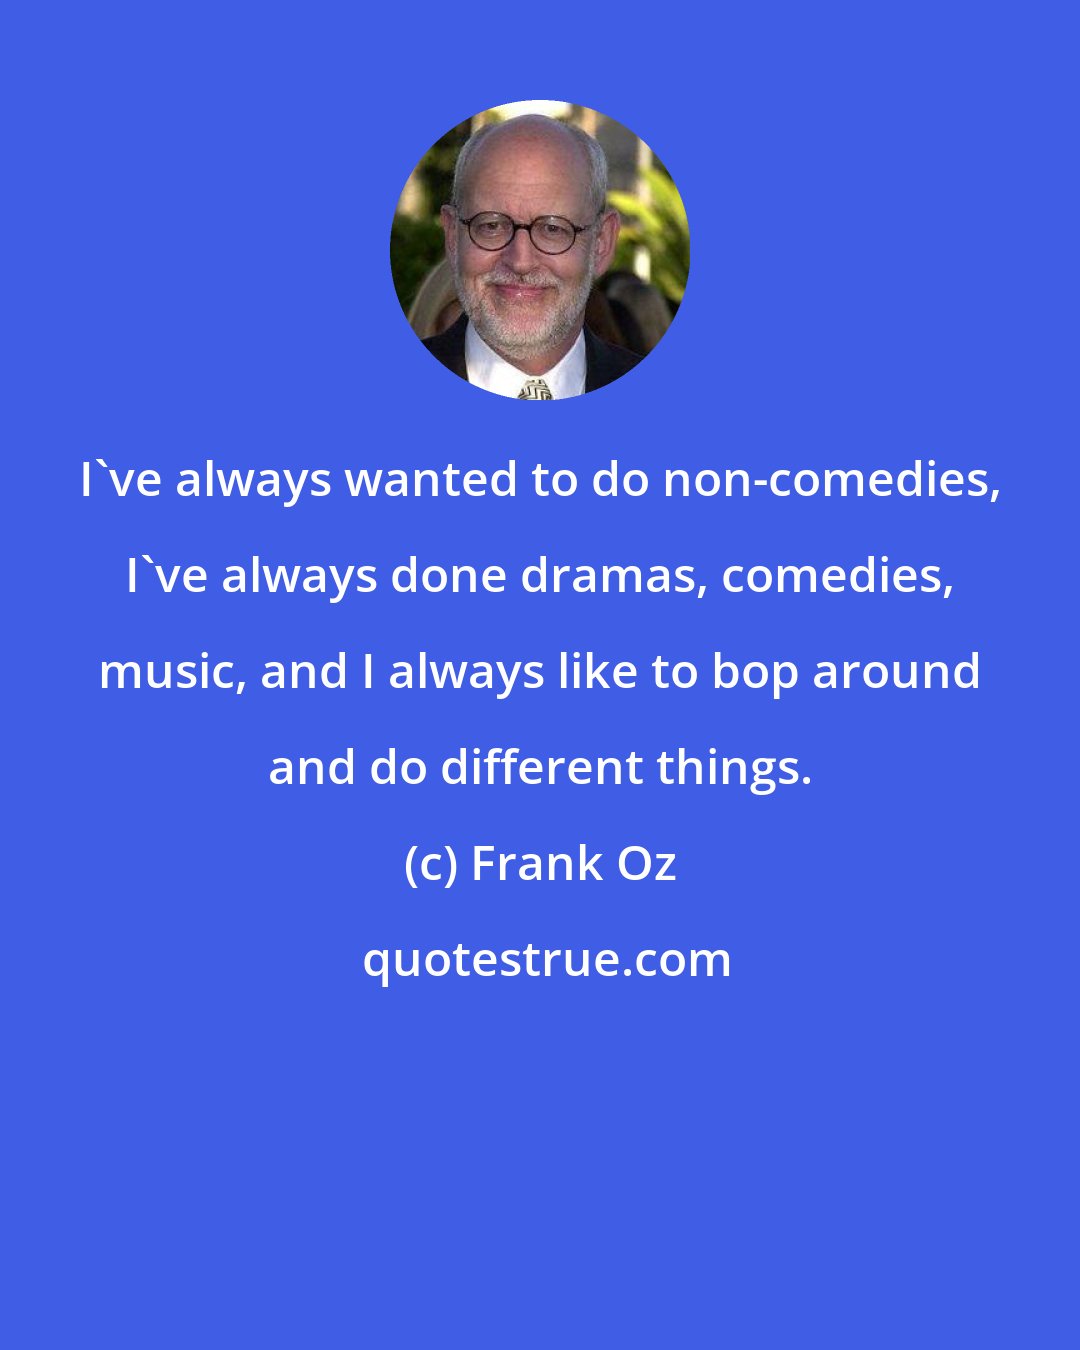 Frank Oz: I've always wanted to do non-comedies, I've always done dramas, comedies, music, and I always like to bop around and do different things.